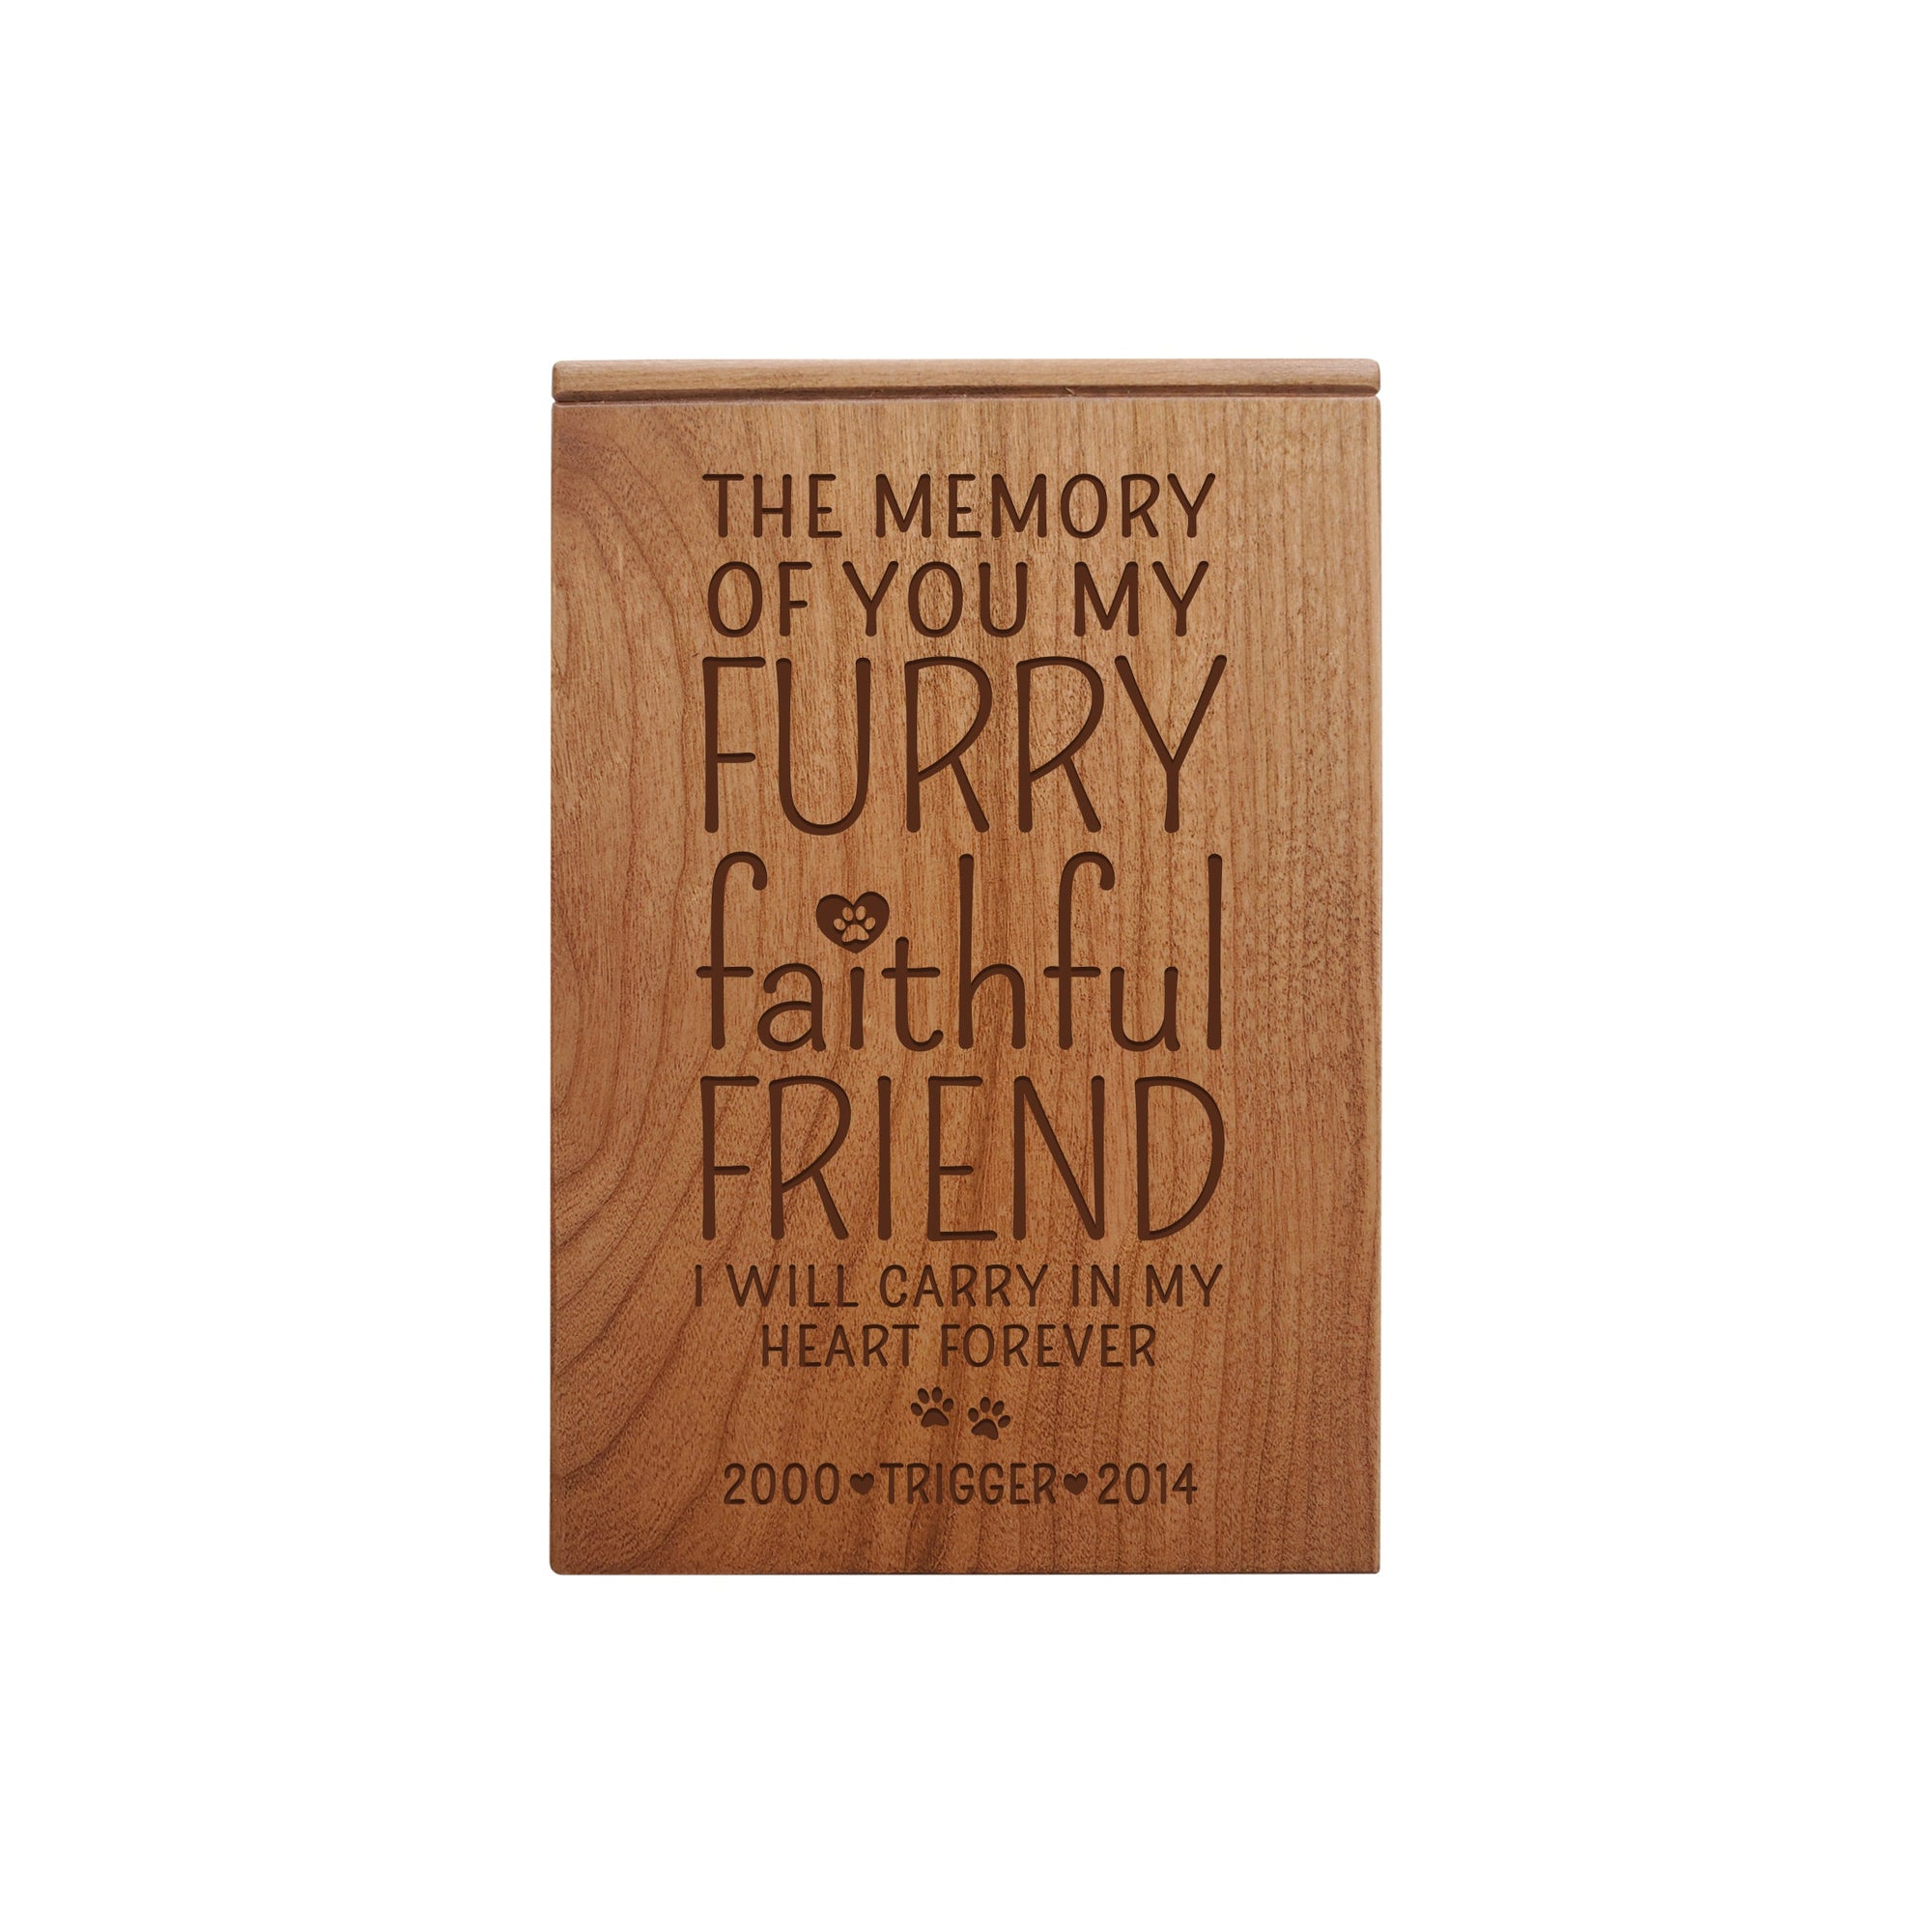 Pet Memorial Keepsake Cremation Urn Box For Dog or Cat - The Memory of You